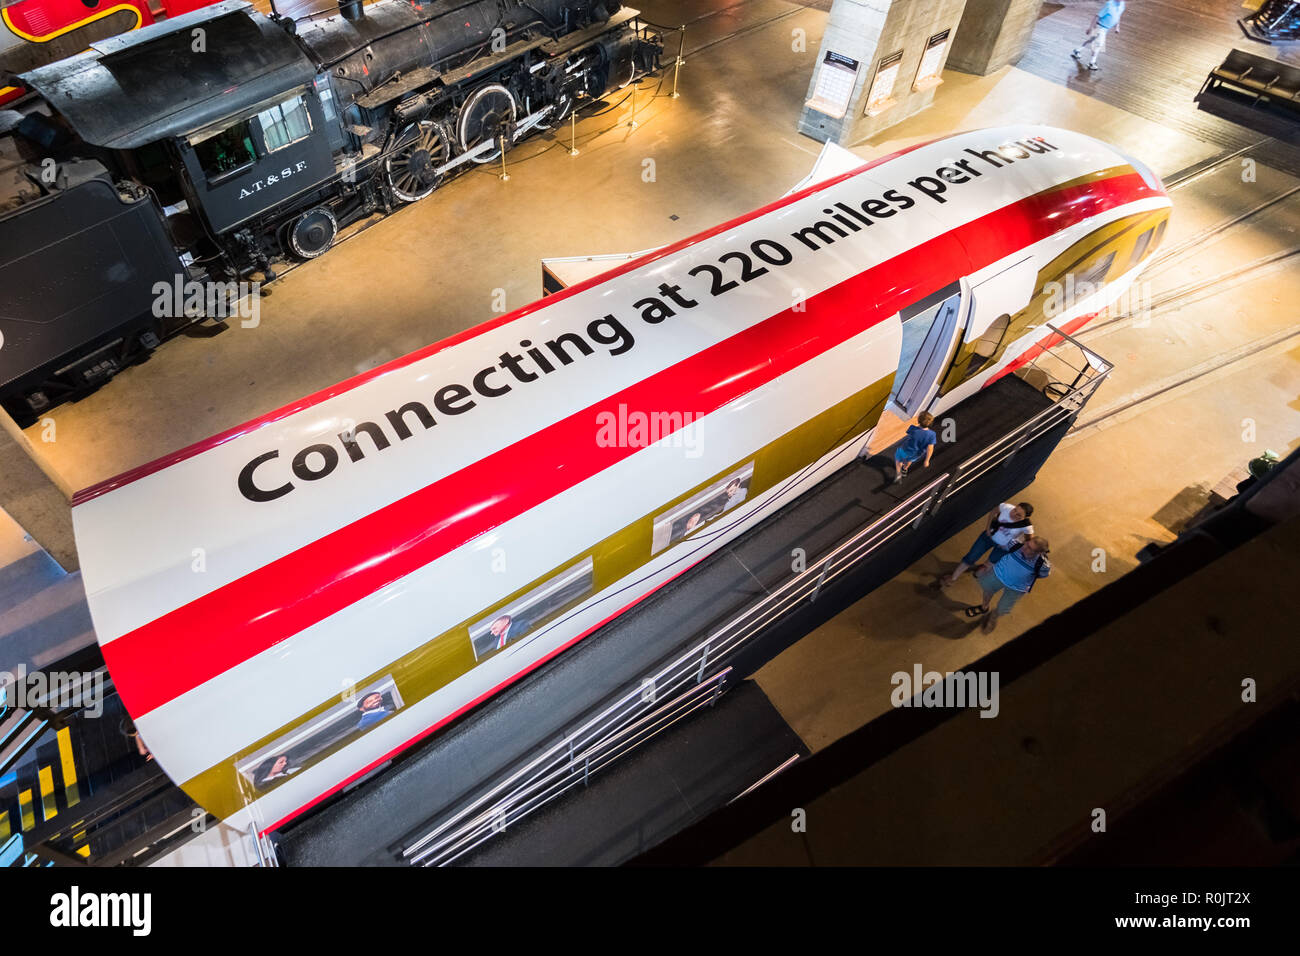 September 22, 2018 Sacramento / CA / USA - Aerial view of high speed train engine produced by Siemens, displayed at California State Railroad Museum Stock Photo